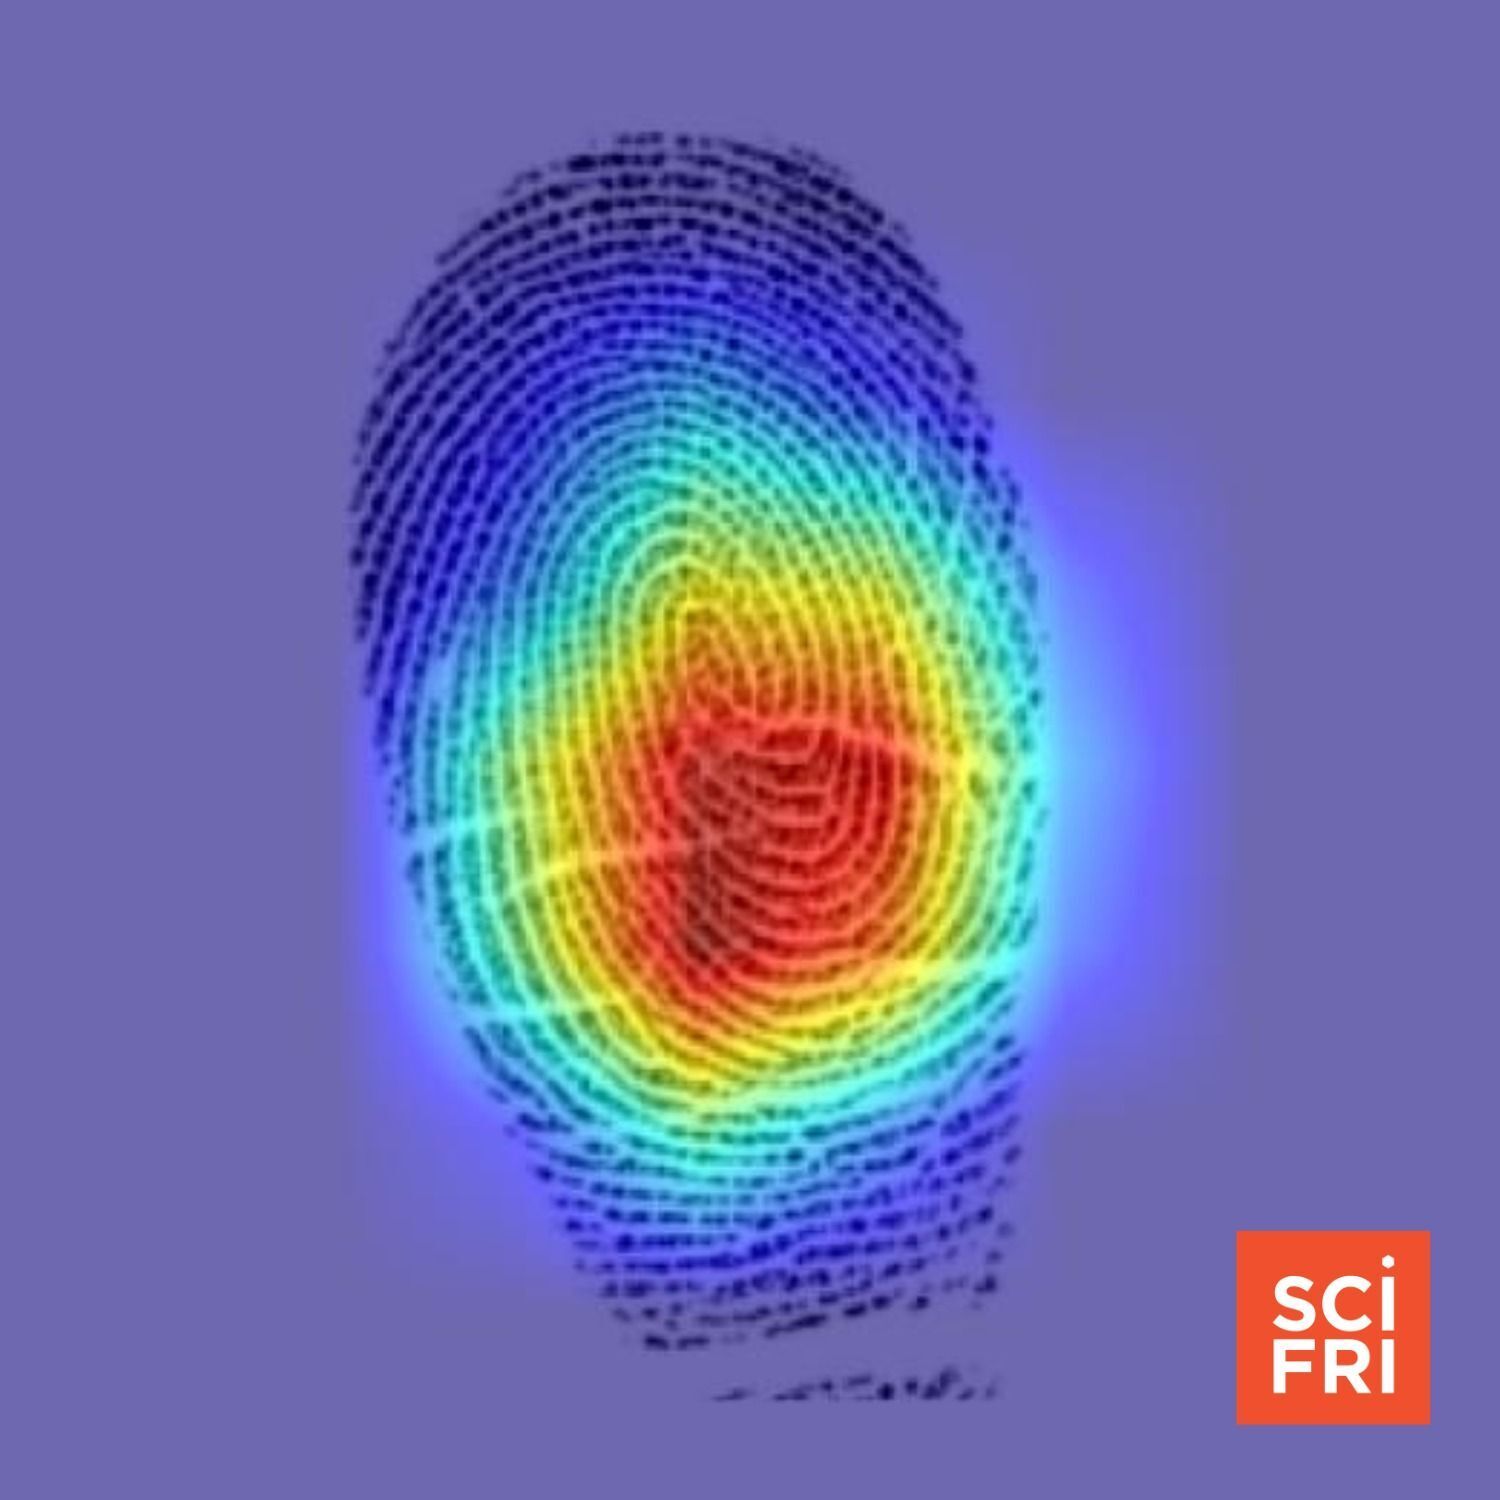 701: Is Each Fingerprint On Your Hand Unique? | In This Computer Component, Data Slides Through Honey